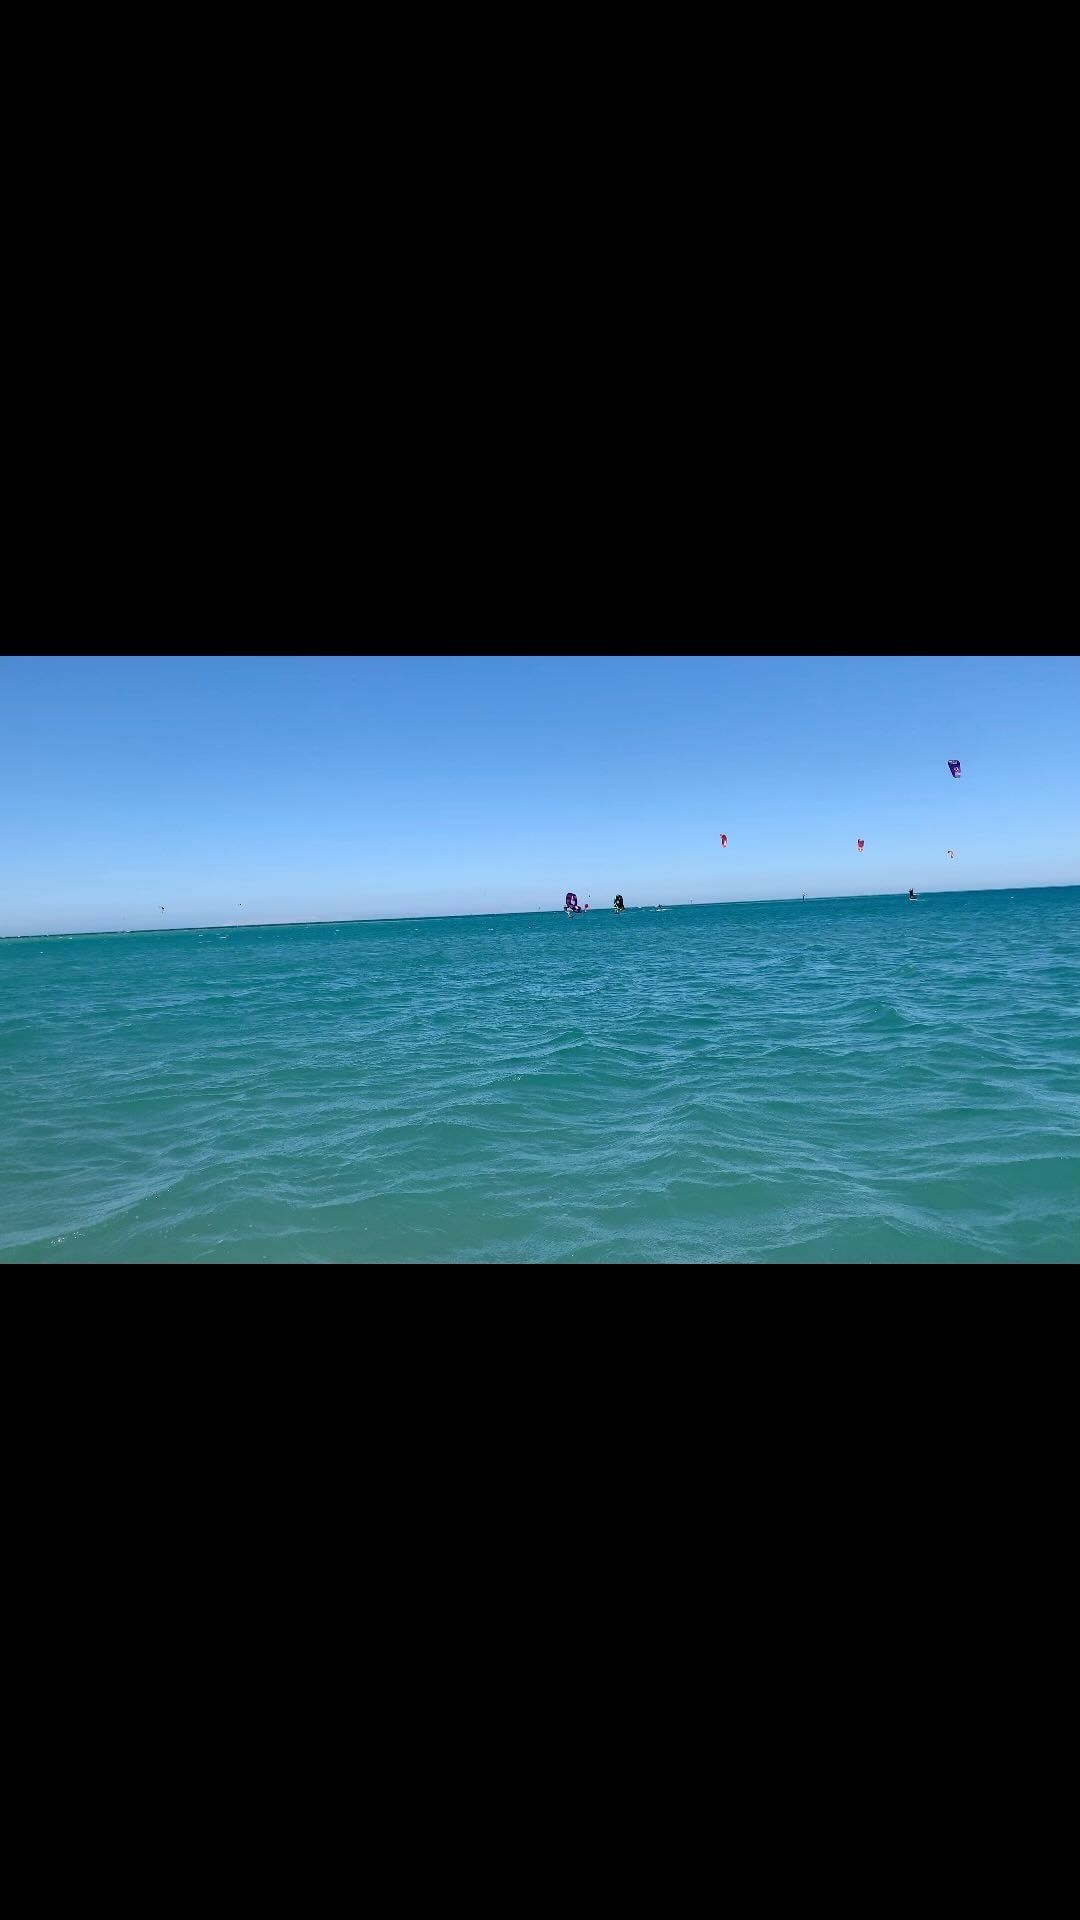 wing foiling - perfect days 🤙
🎥 @osama_kite 🤙👍

#wingfestival #winging #wings #fly #flyhigh #airborn #foiling #wing ...